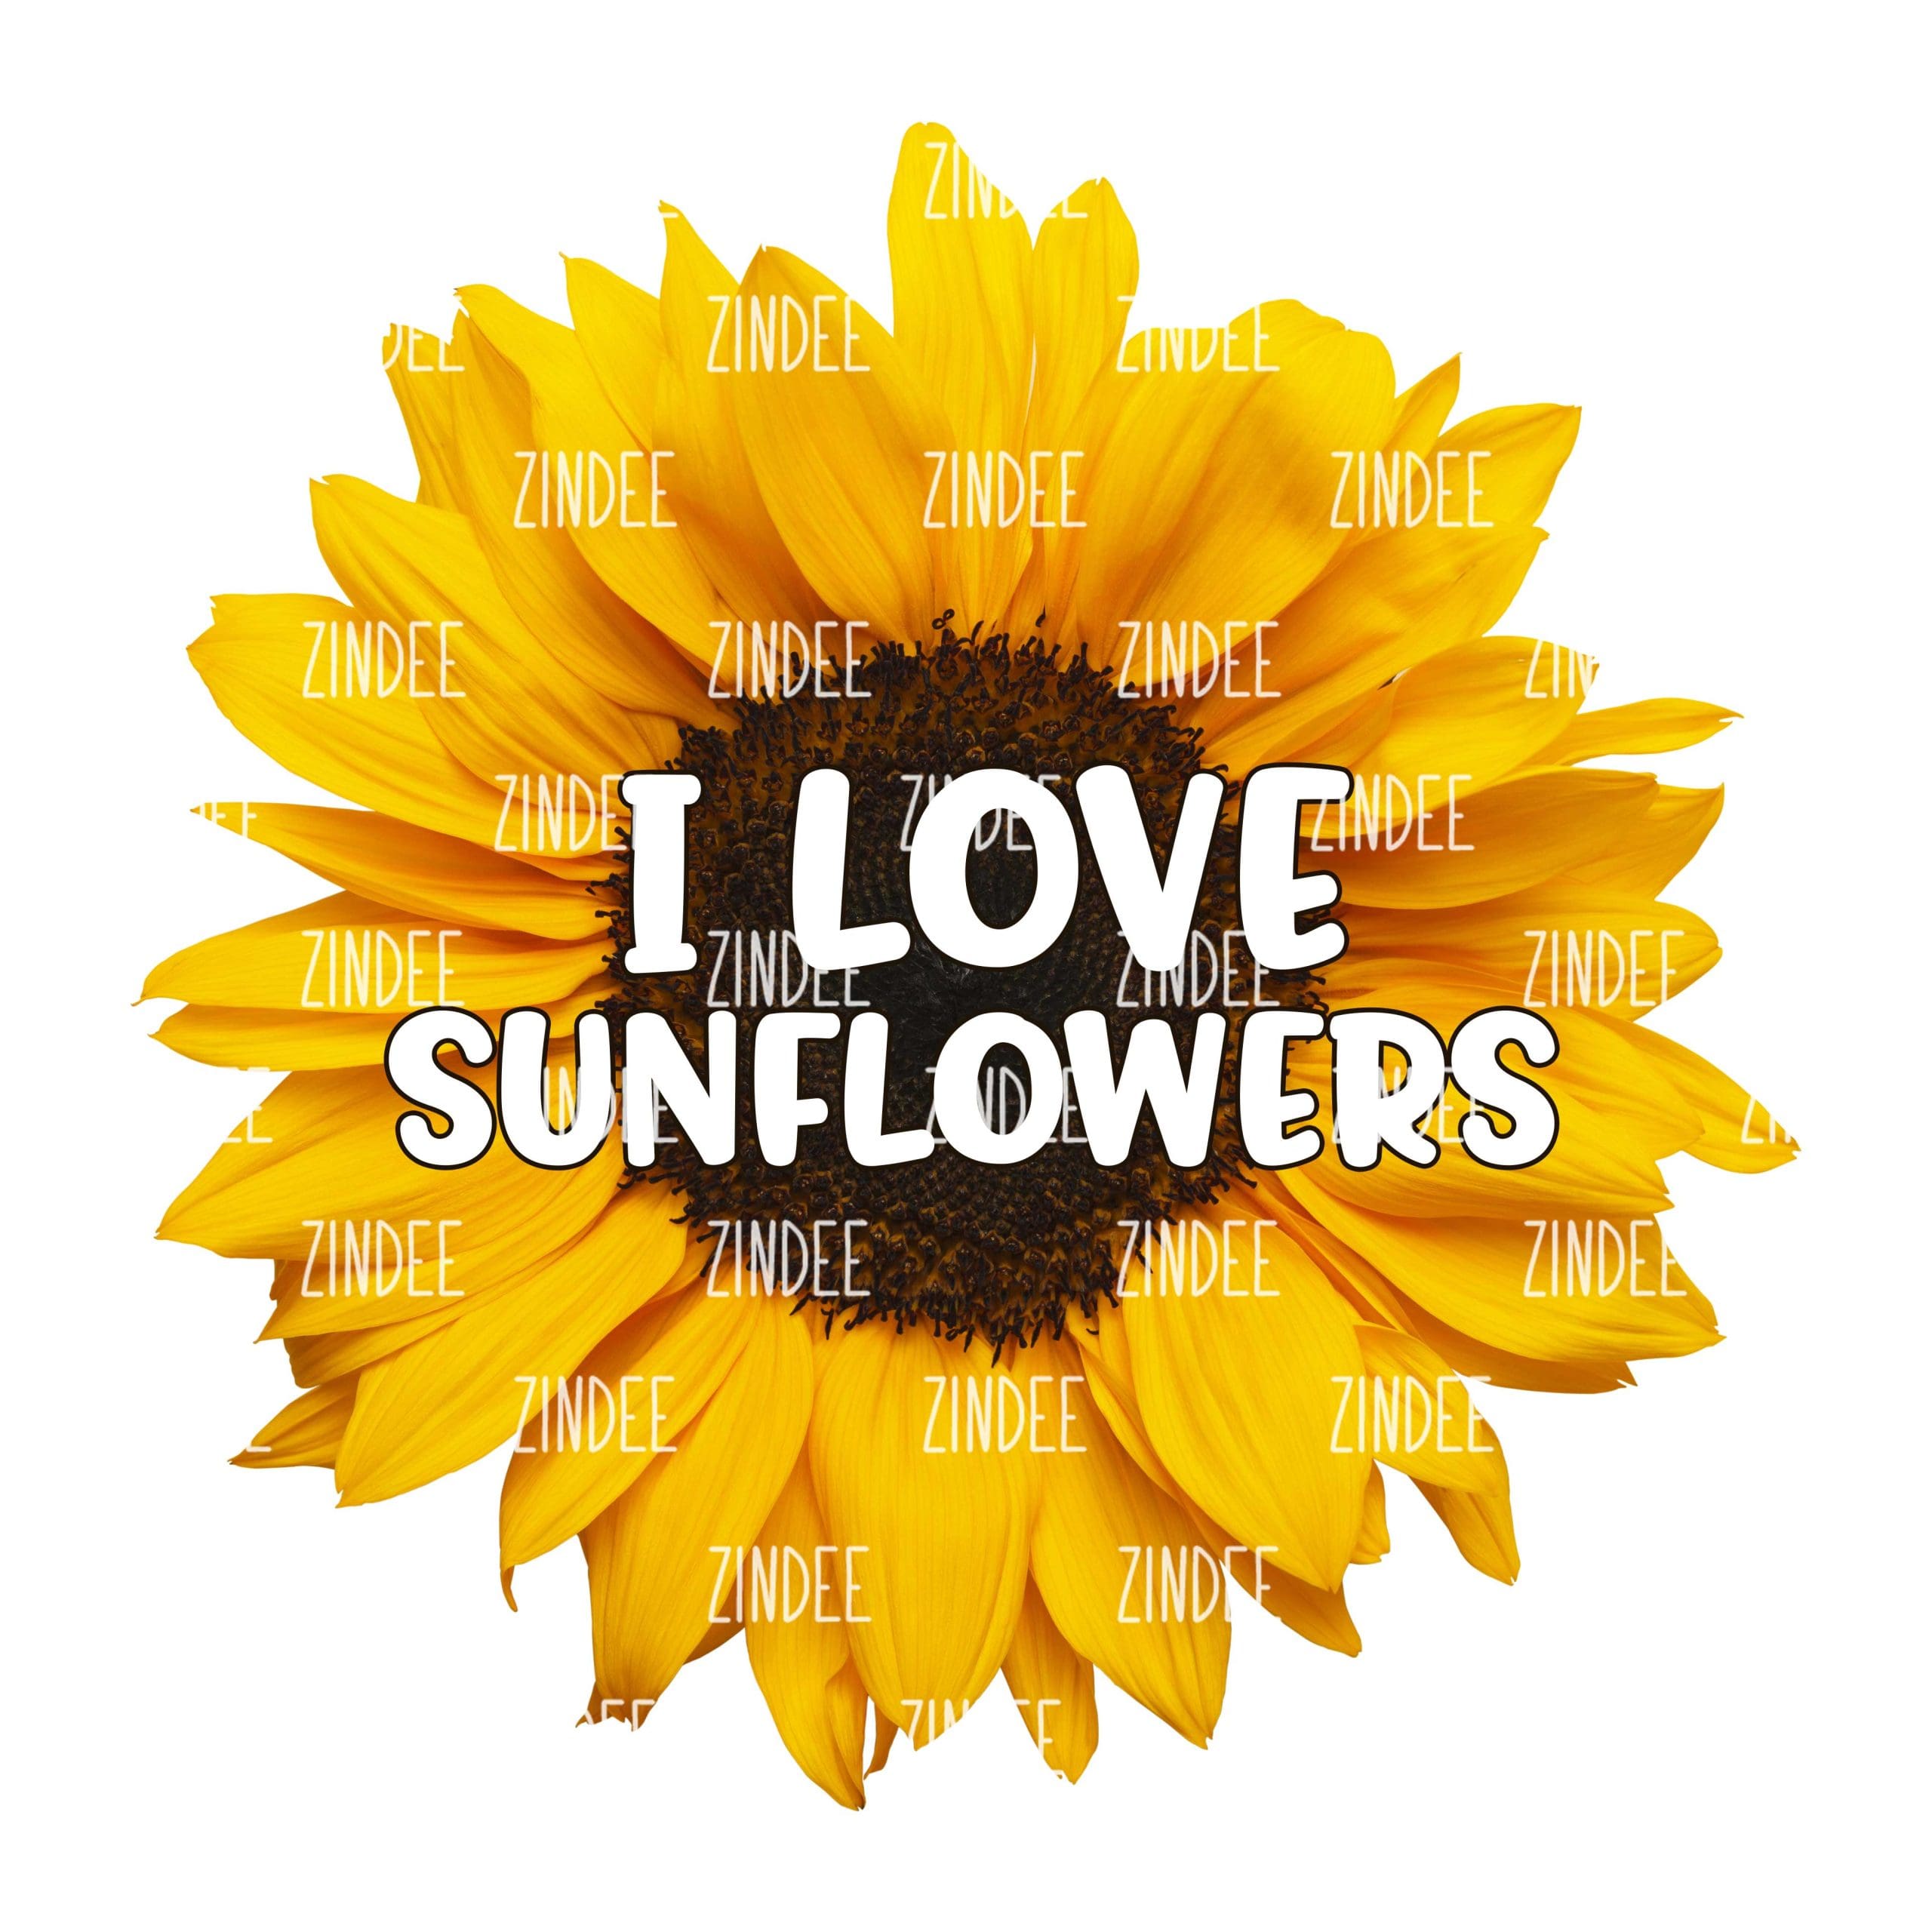 Ready to Press, Sublimation Transfers, DIY Shirt, Sublimation, Transfers  Ready to Press, Heat Transfer Designs, Love, Sunflowers 